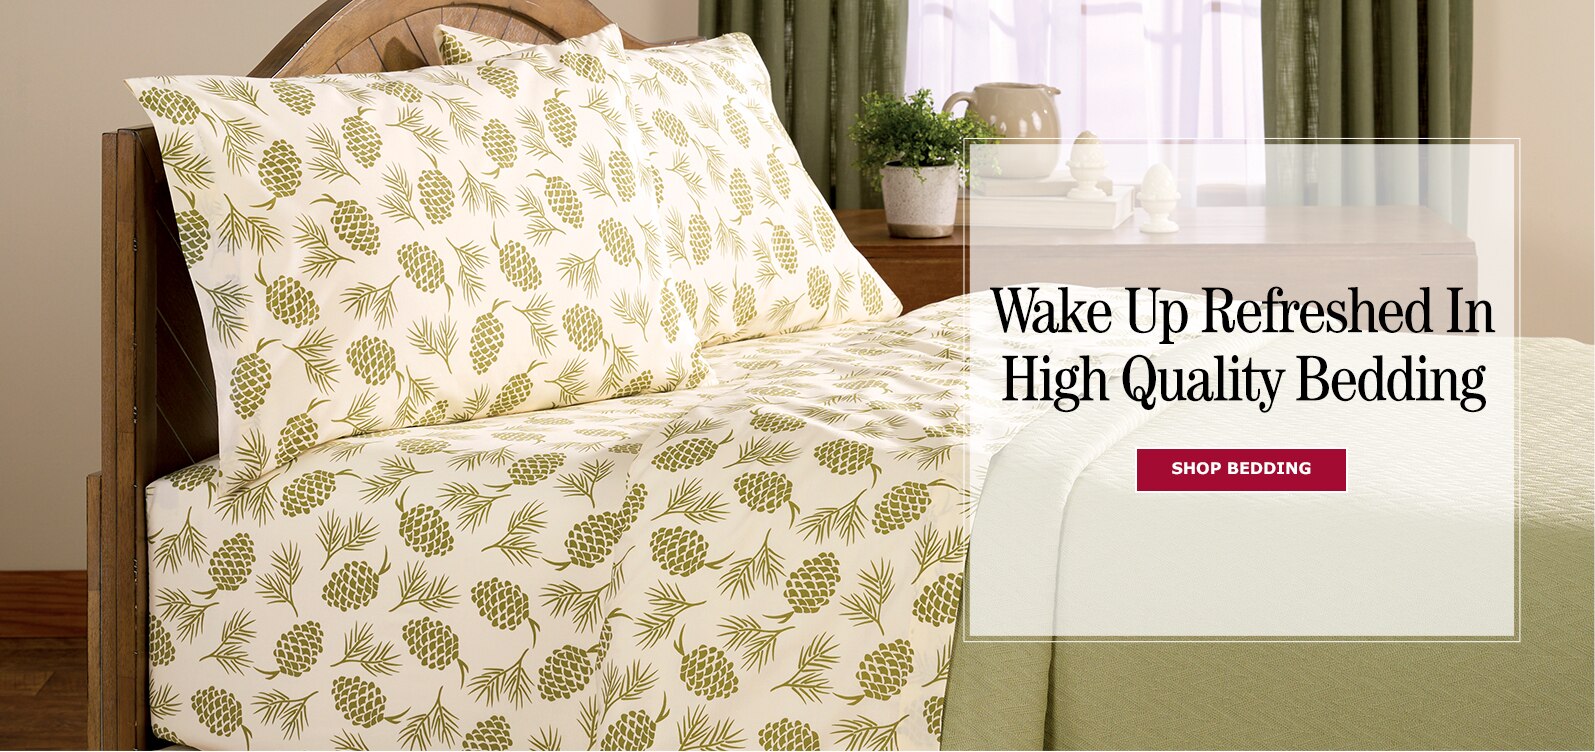 Wake Up Refreshed in High Quality Bedding. Shop Bedding